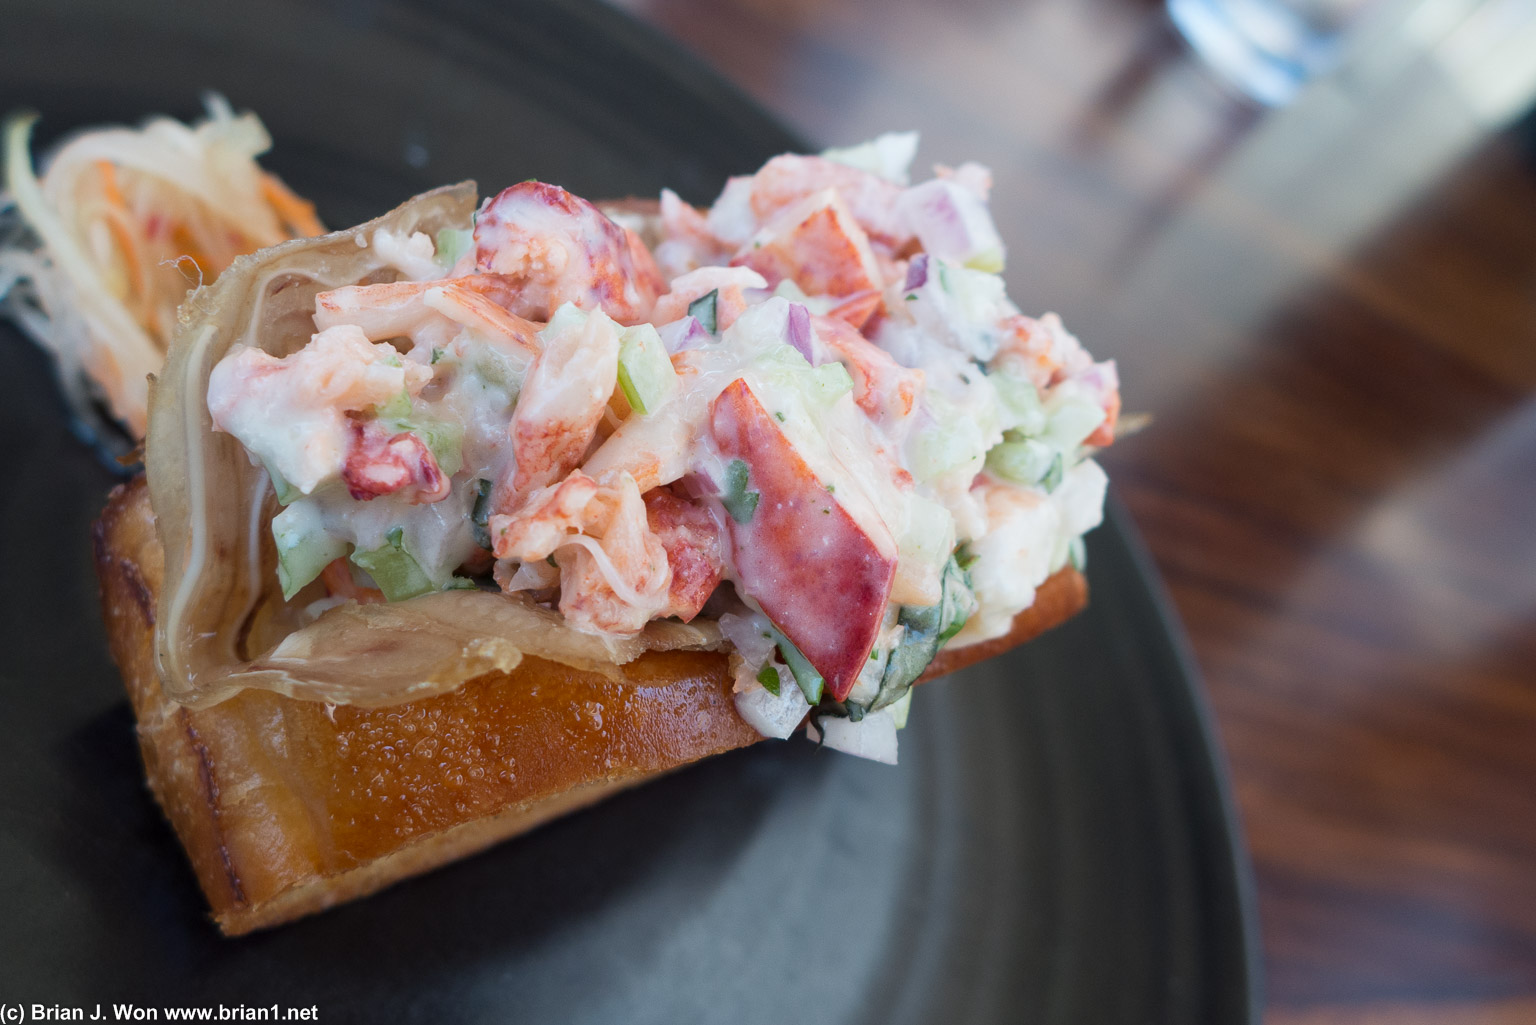 Lobster roll. Small but tasty.